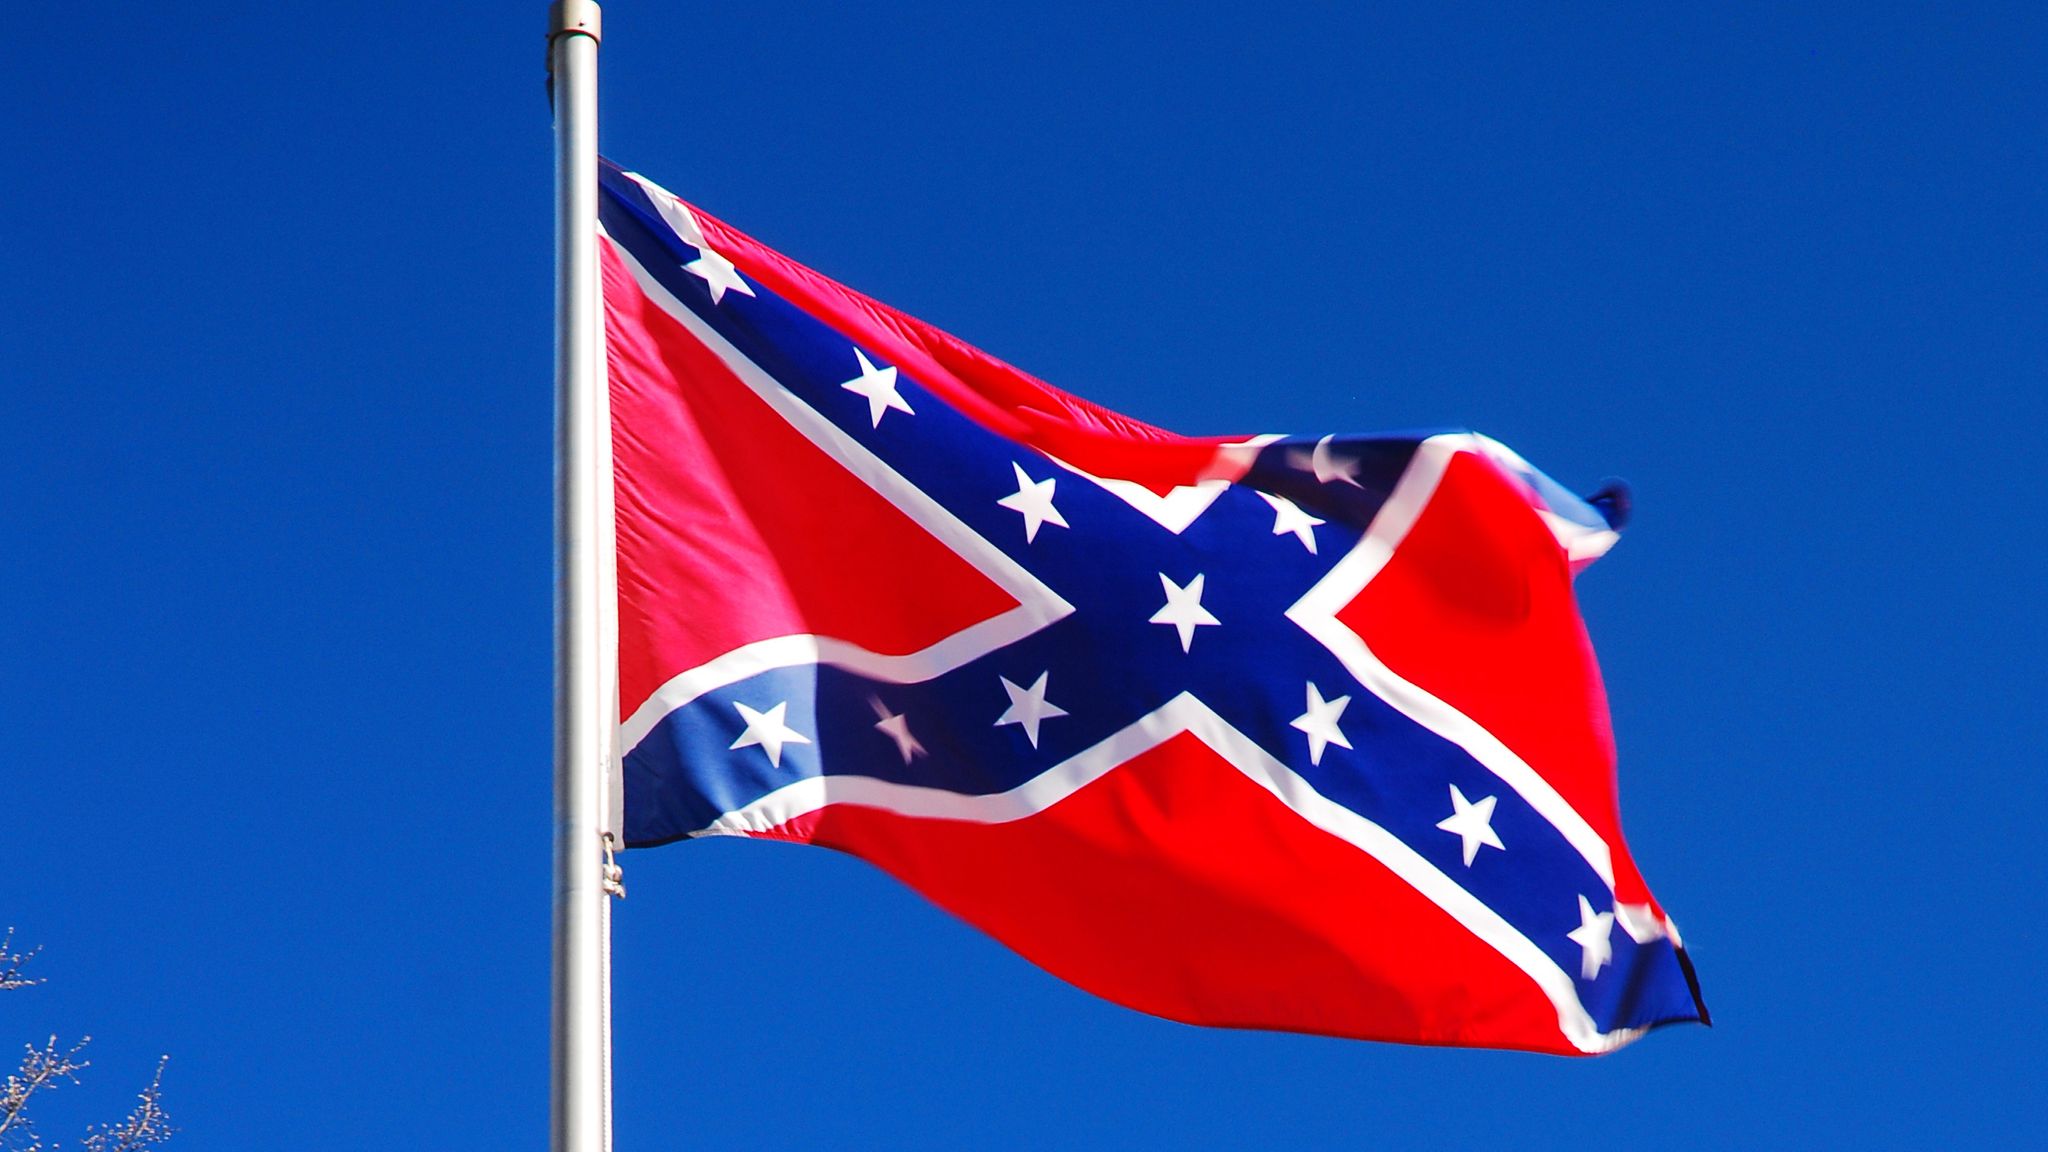 Grand Ole Opry in Glasgow votes to ban use of Confederate flag | UK ...